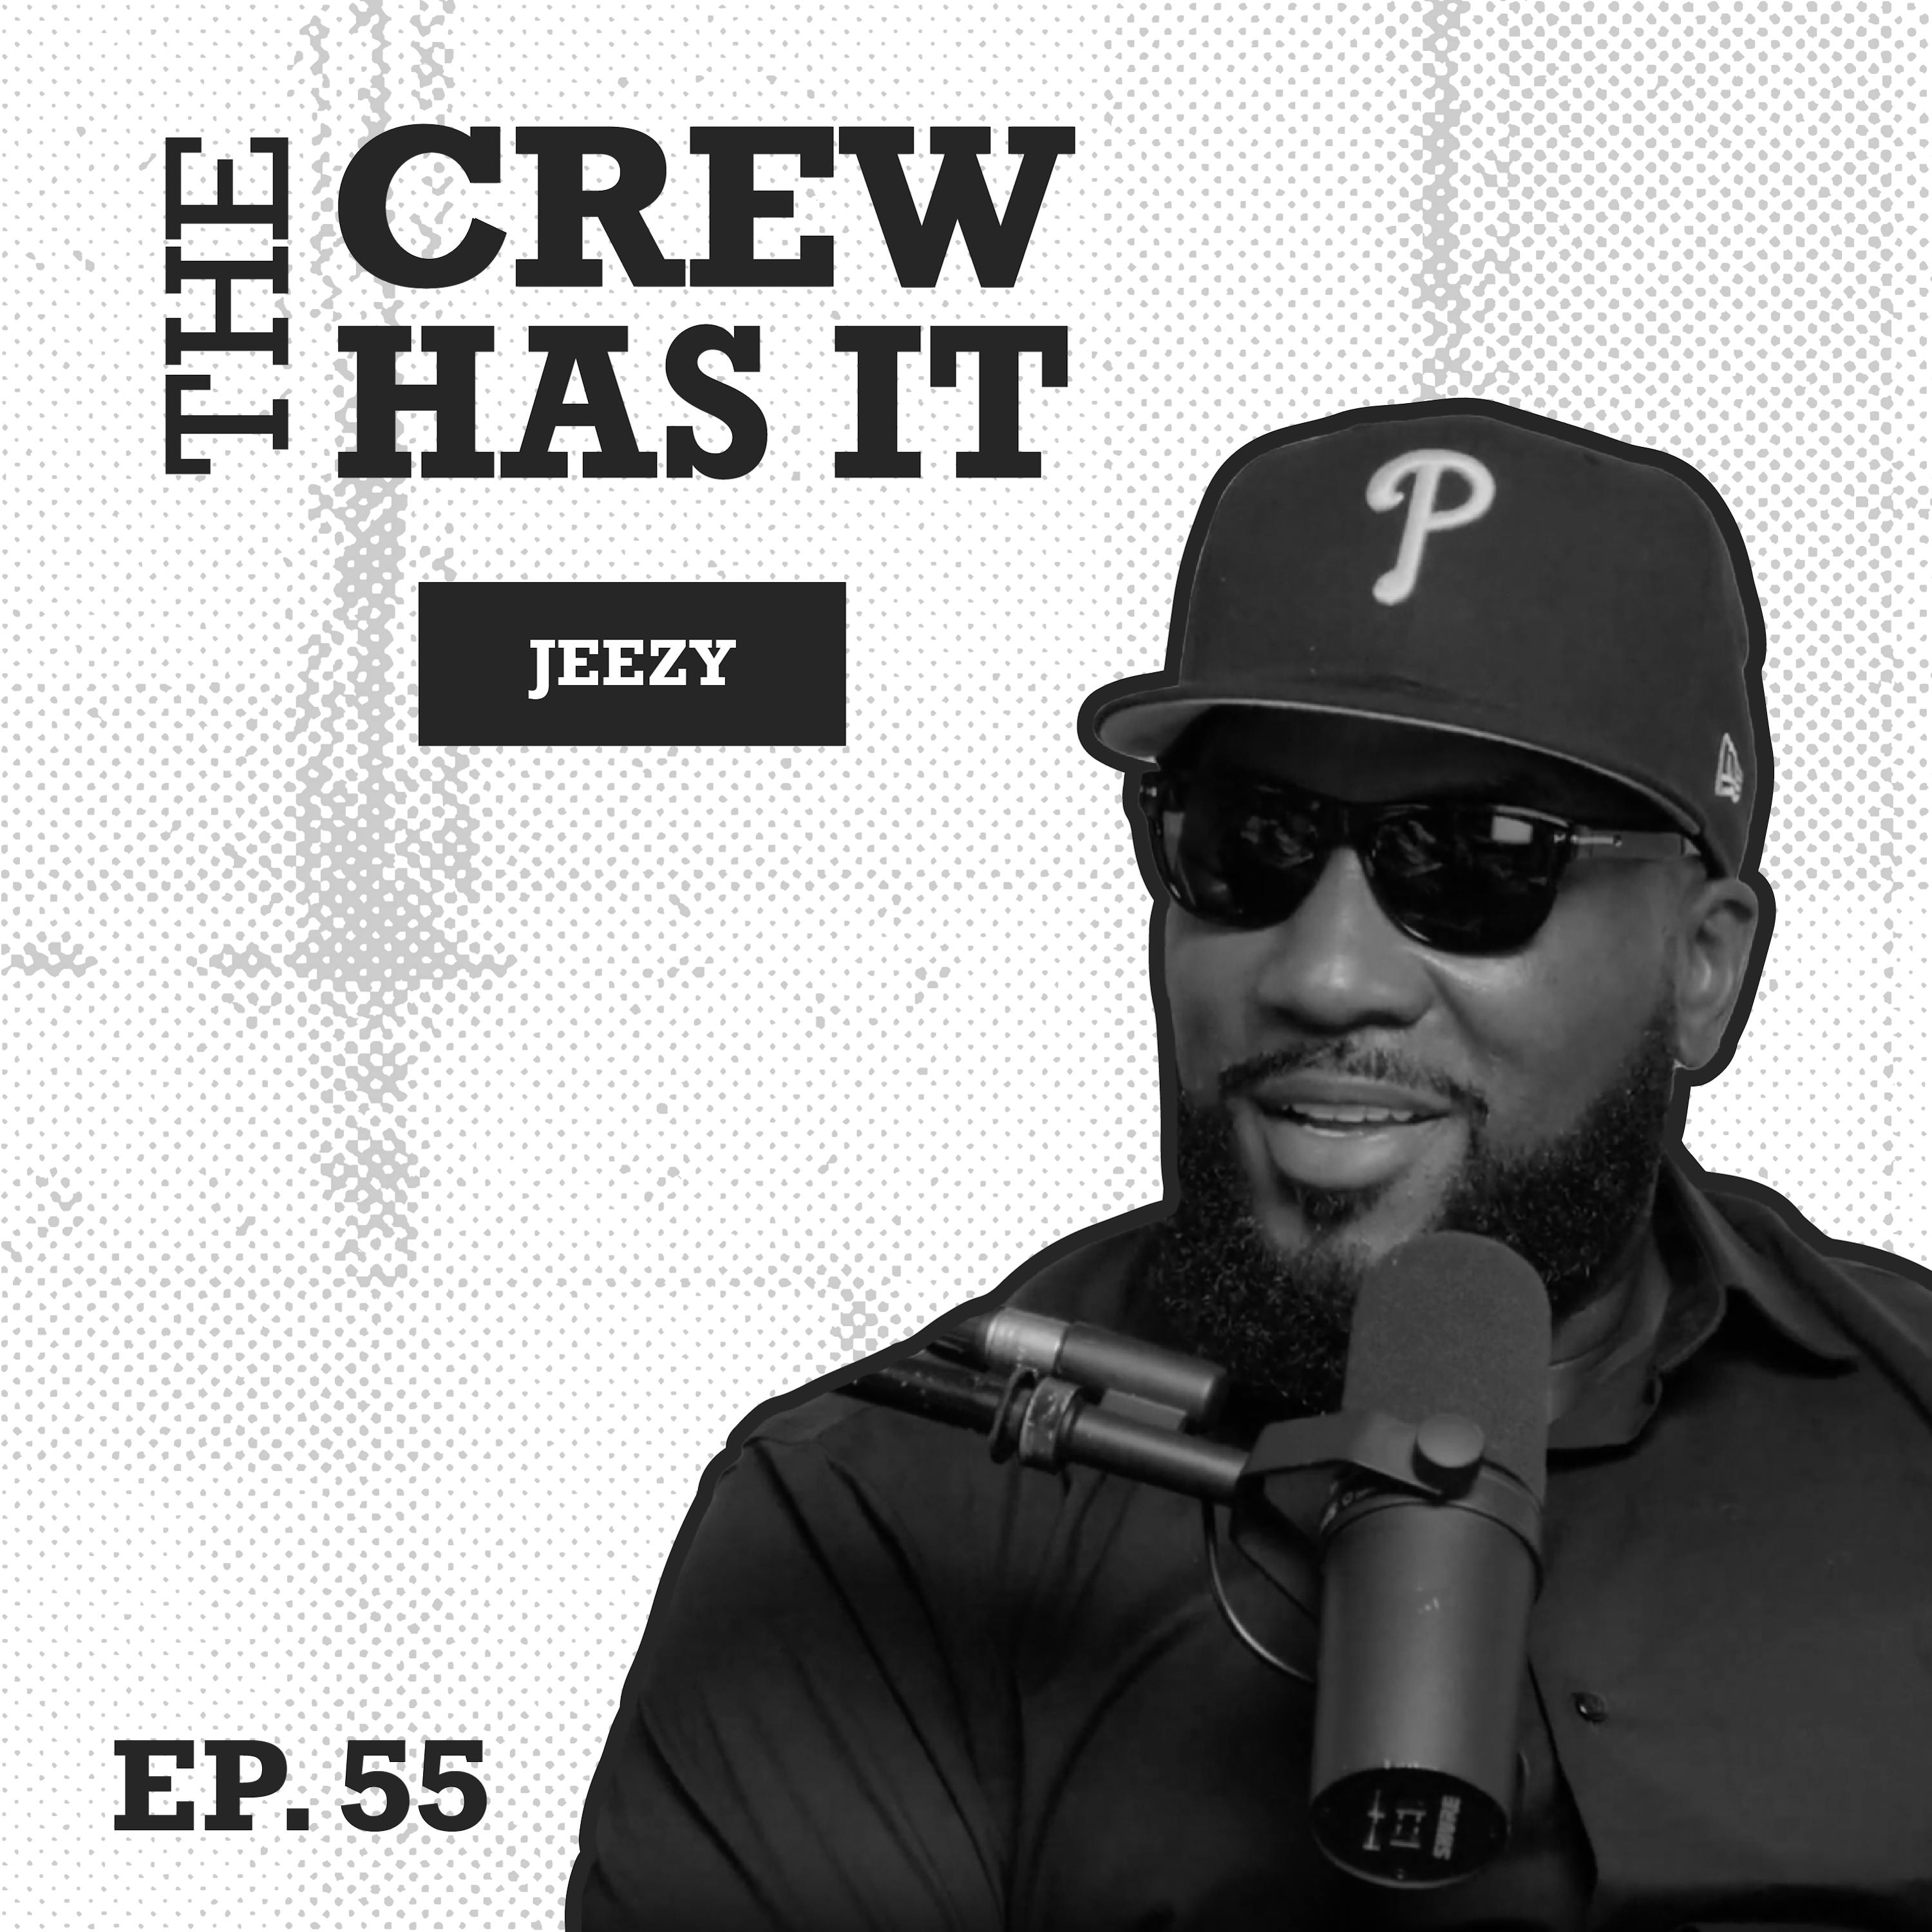 Jeezy on being a Magic City legend, Rap Career & touring with Jay-Z and Lil Wayne | The Crew Has It